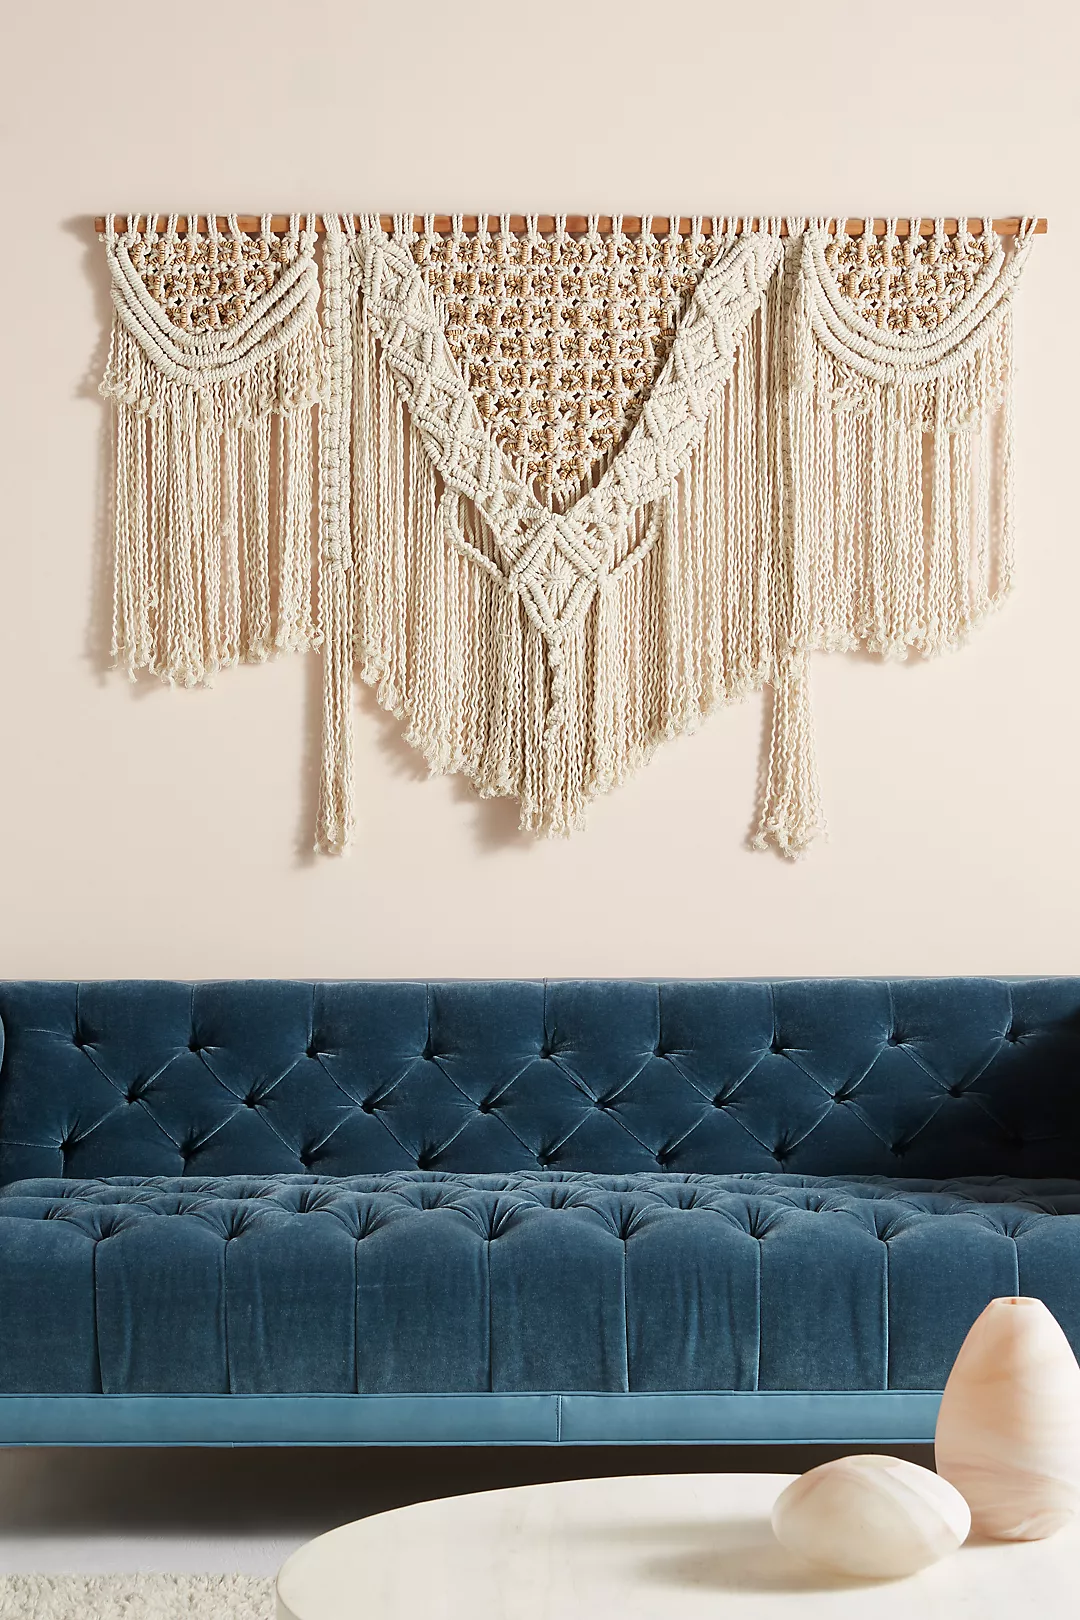 Boho Wall Decor Ideas; the perfect combination of organic and natural decor elements, which gives you a sense of freedom and peace.